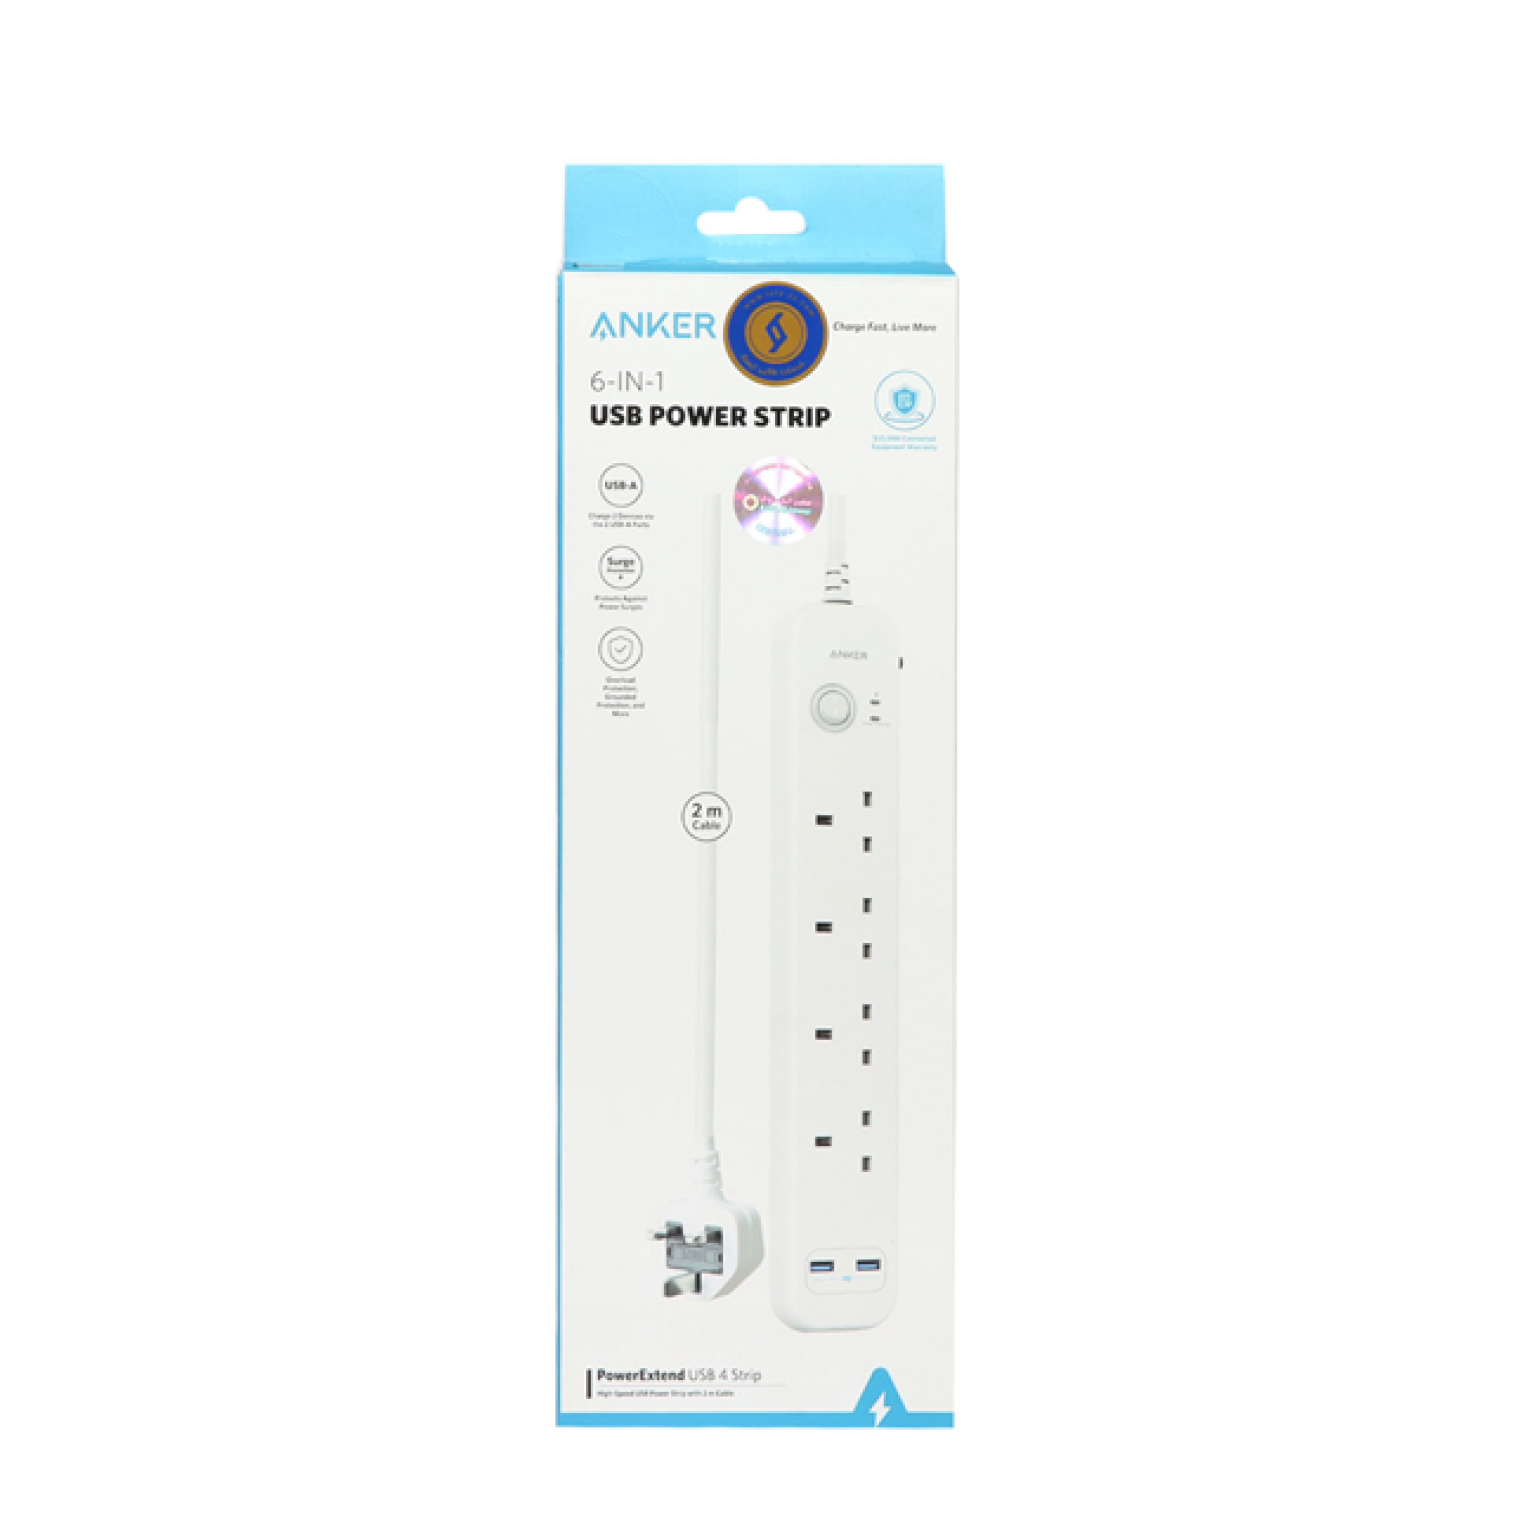 ANKER analogue 4 house electrical protector with 2 meters switch model A9141 white 1